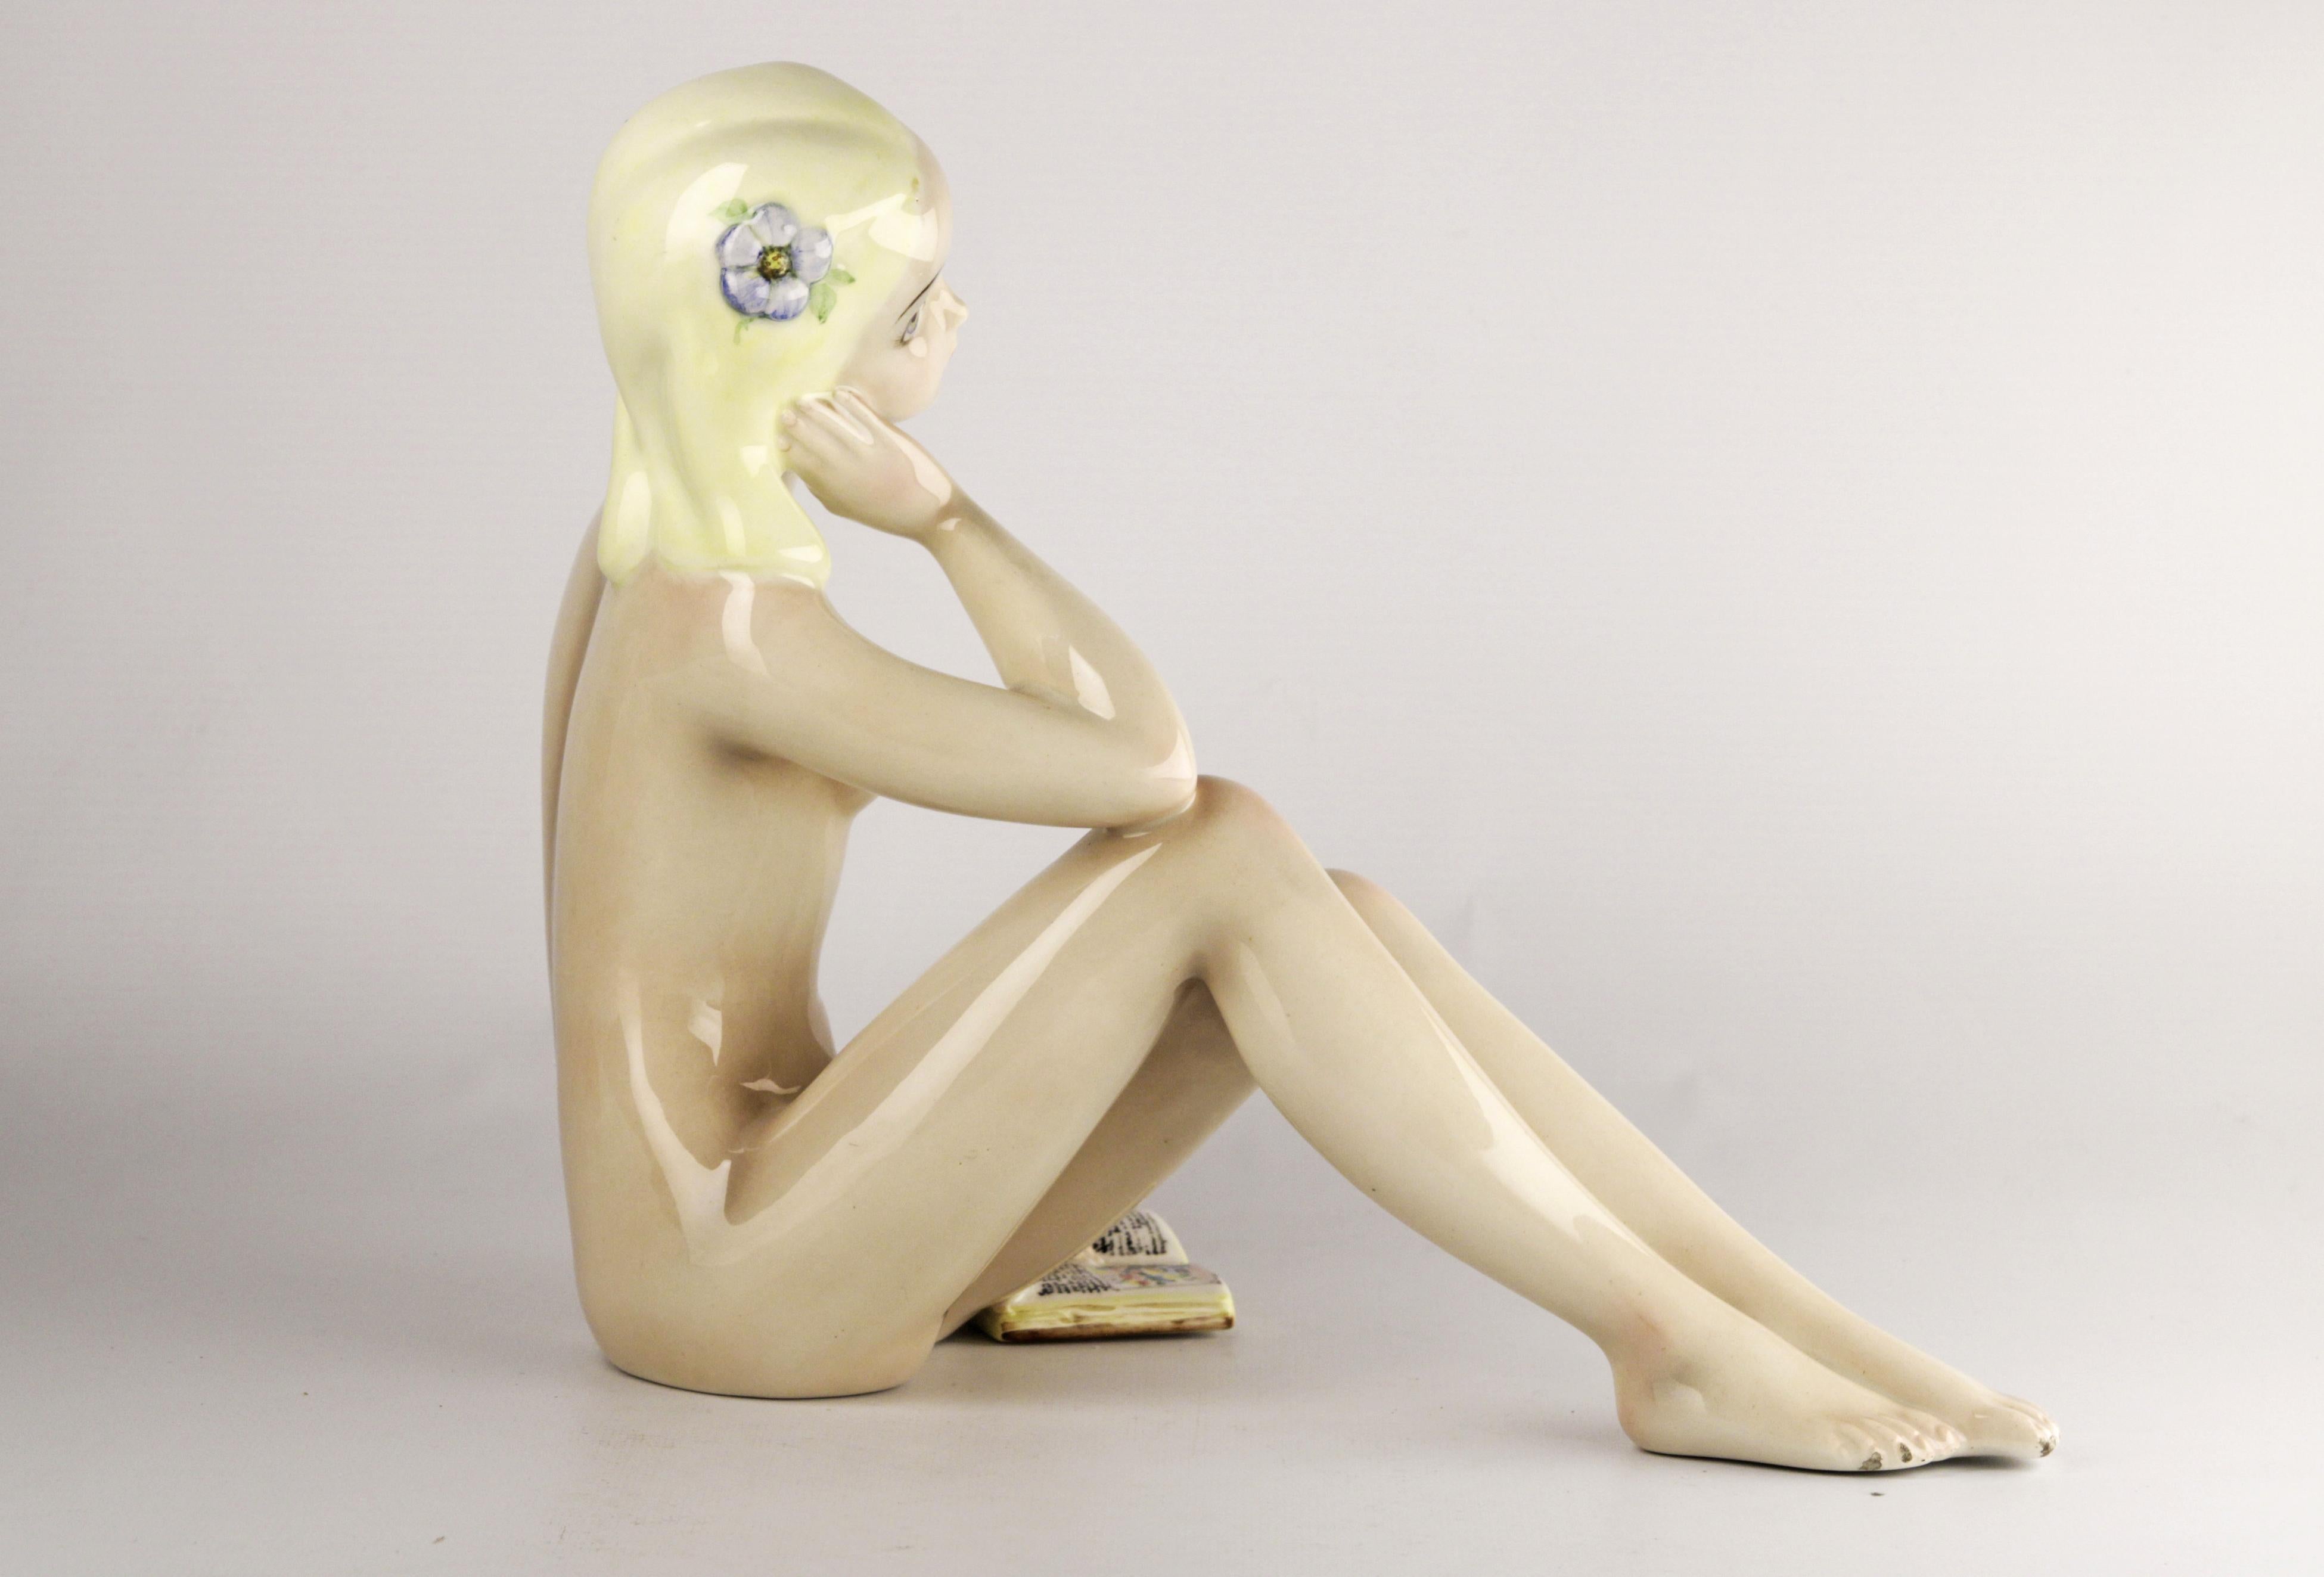 Mid-Century Modern Mid-20th Century Glazed Ceramic Naked Woman Figure Sculpture from Torino, Italy For Sale